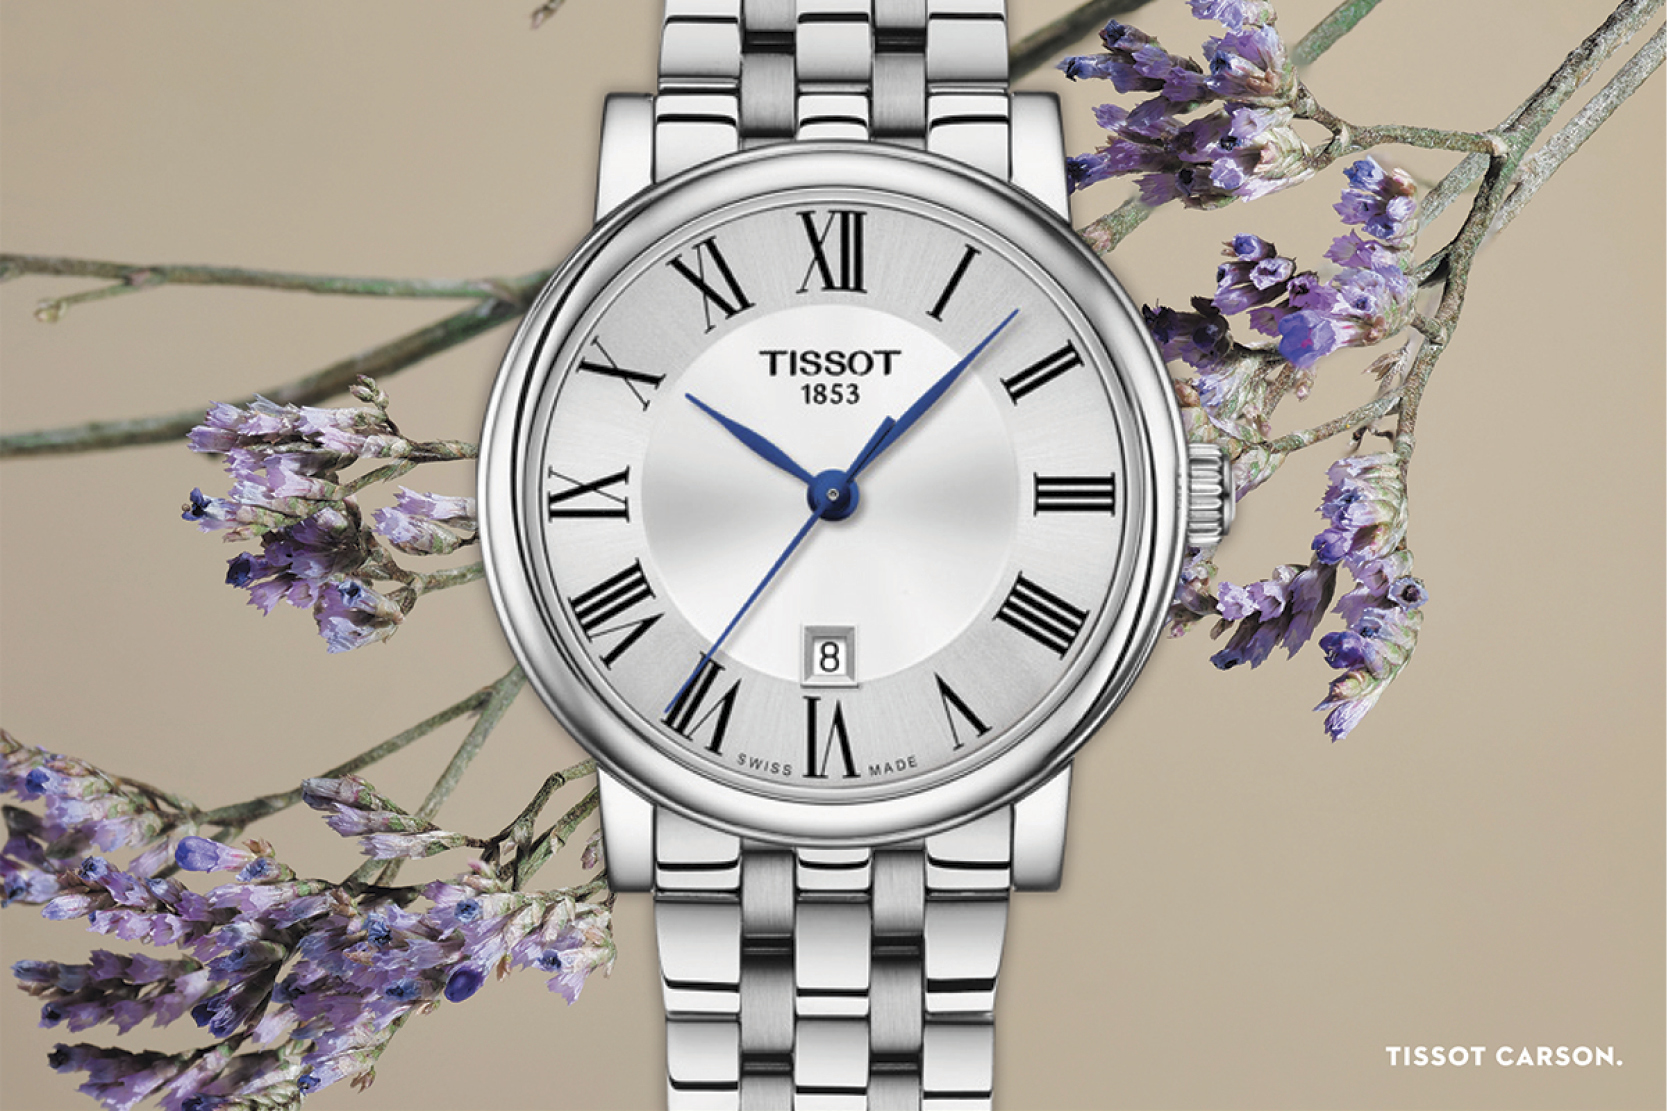 Try your luck at Crack the Code by Tissot!